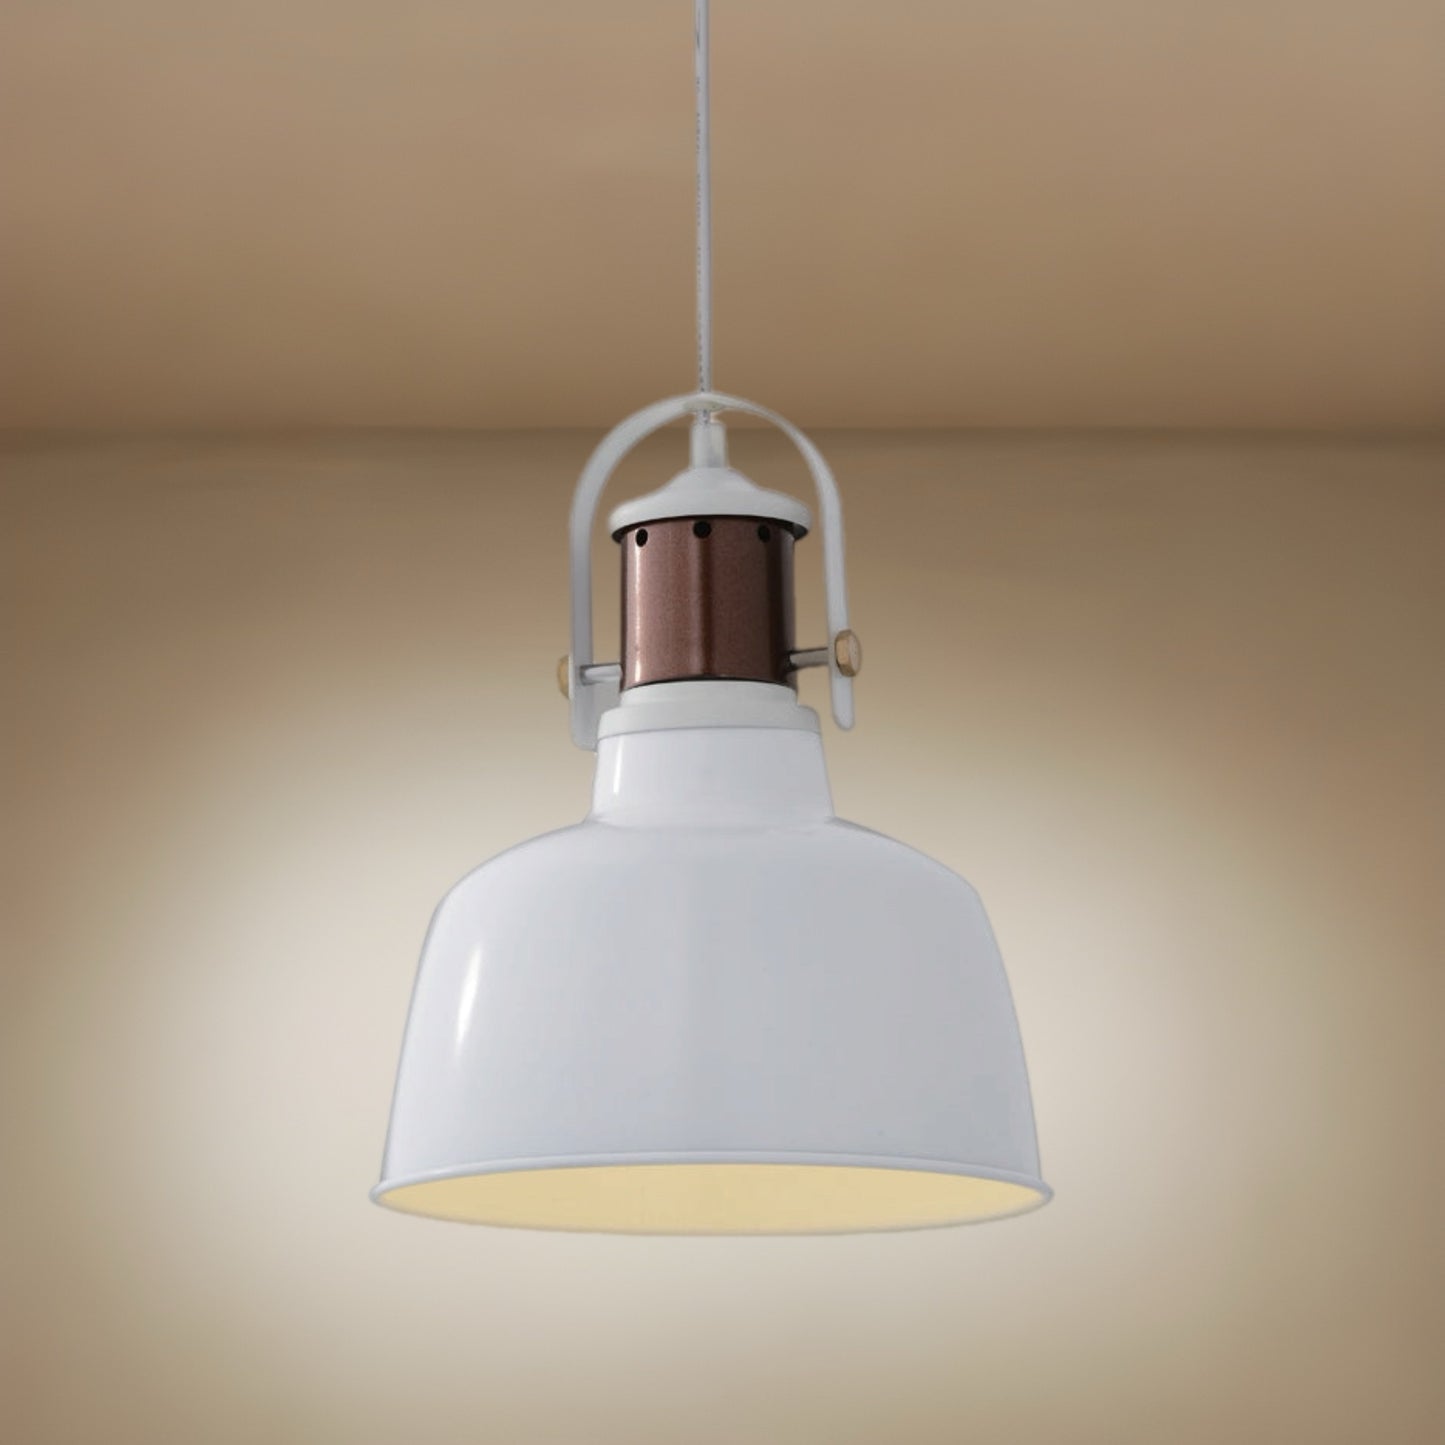 Our Marnie white adjustable dome ceiling pendant light is the perfect addition to any room to add a modern and industrial focal point. The industrial style of this light brings a bright and elegant aesthetic to your interior as the dome shape creates a modern and contemporary appearance. 